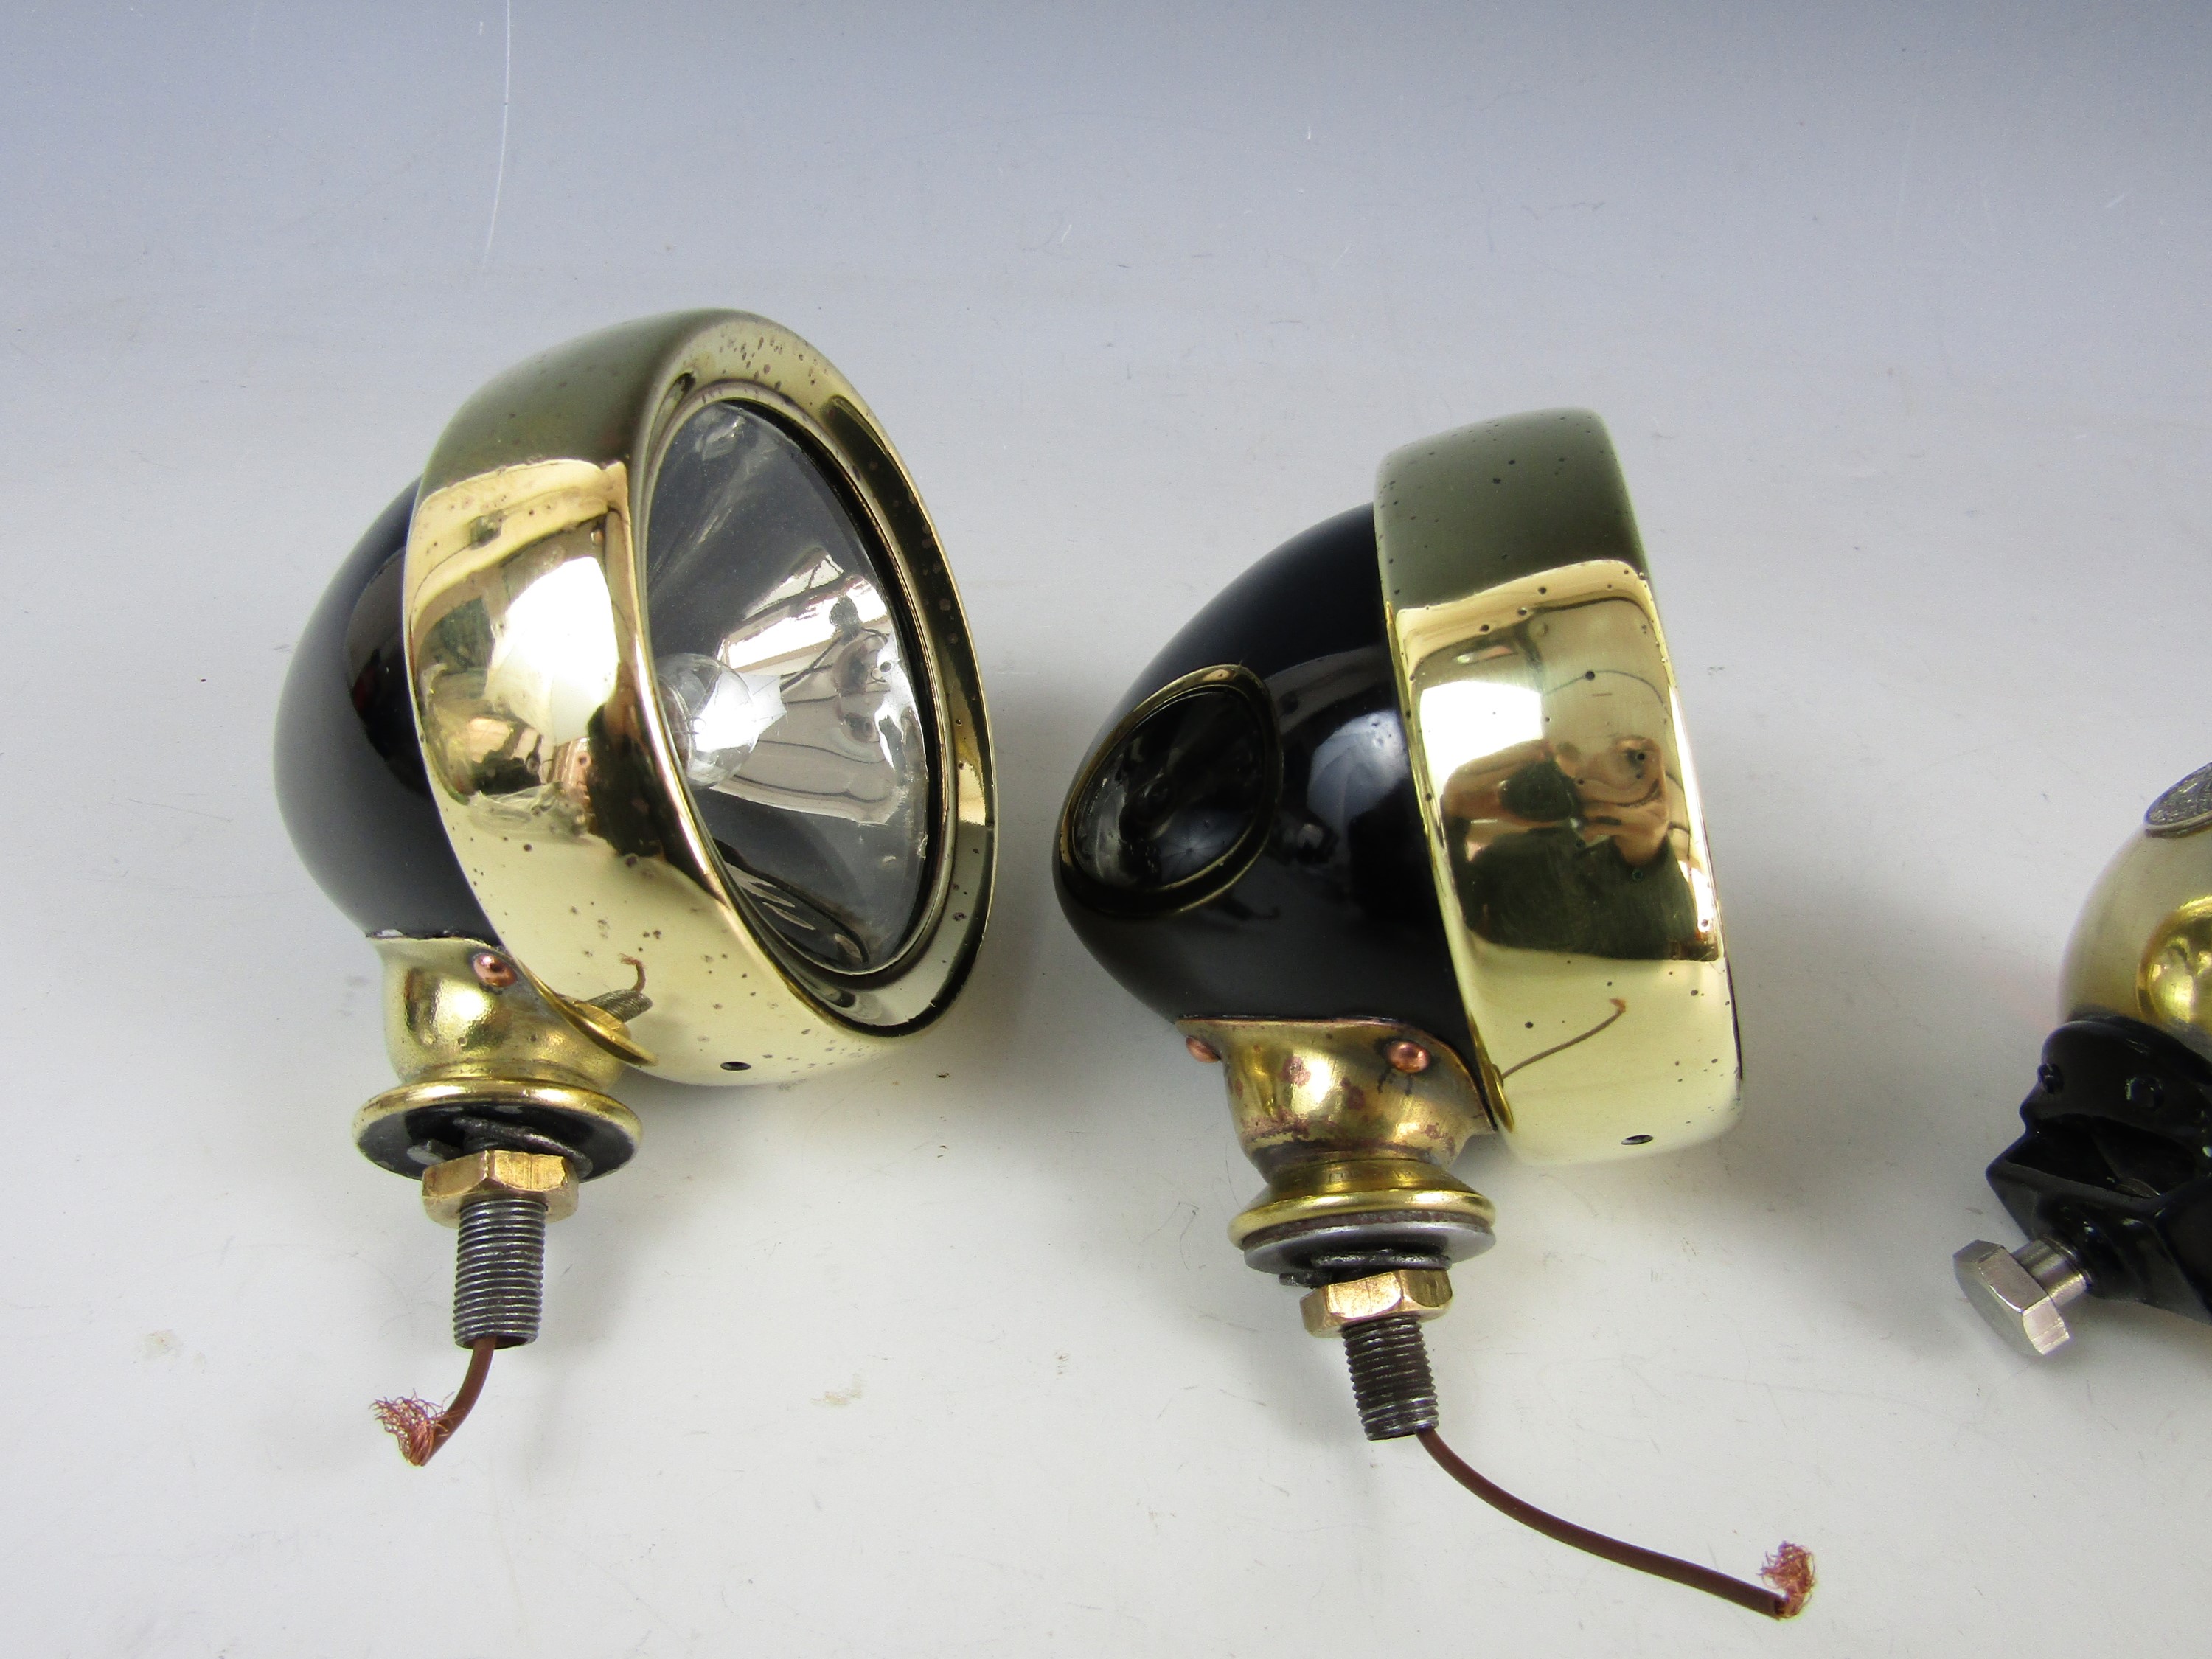 A pair of 1920s Lucas King of the Road car lamps, together with a J Neale & Sons Ltd RAYDYOT lamp - Image 3 of 7